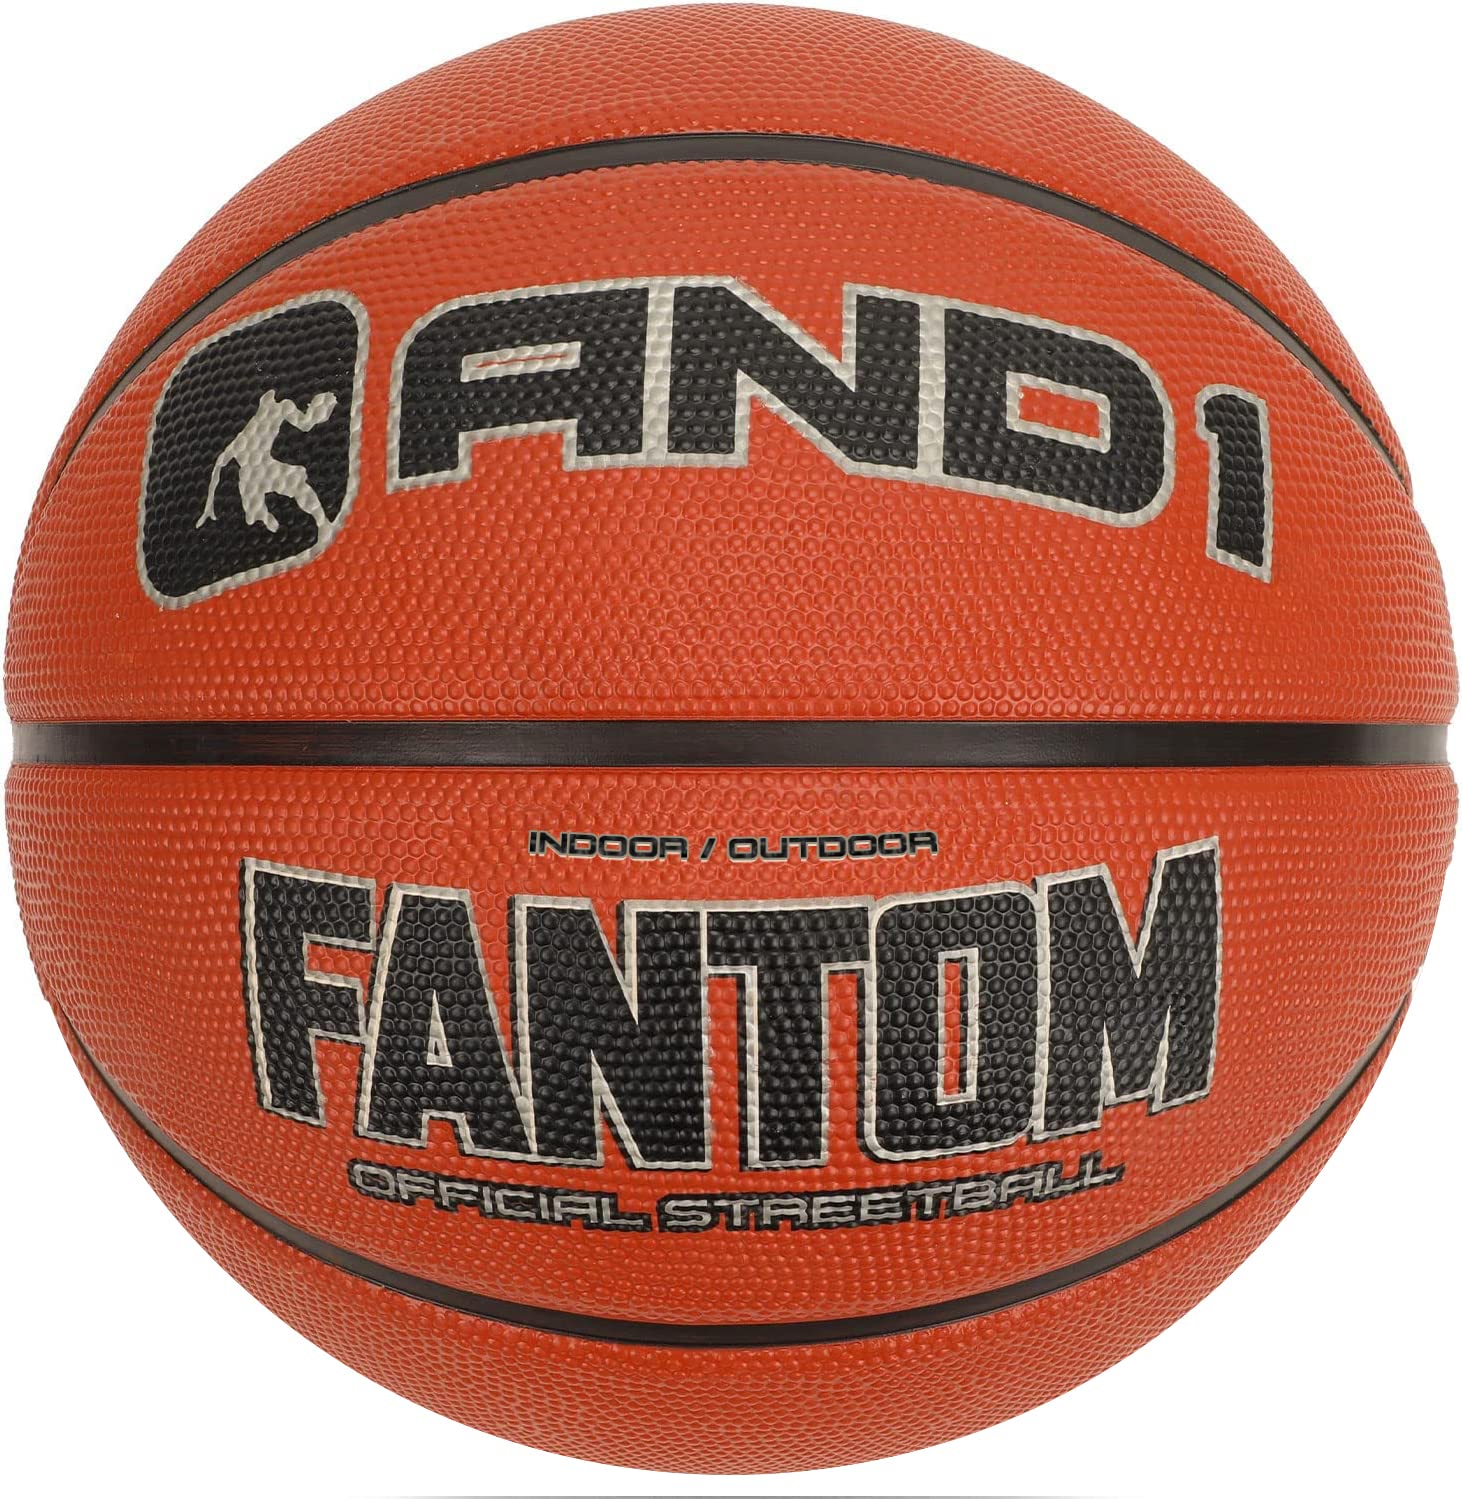 AND1 Fantom Rubber Basketball - on sale again $5.